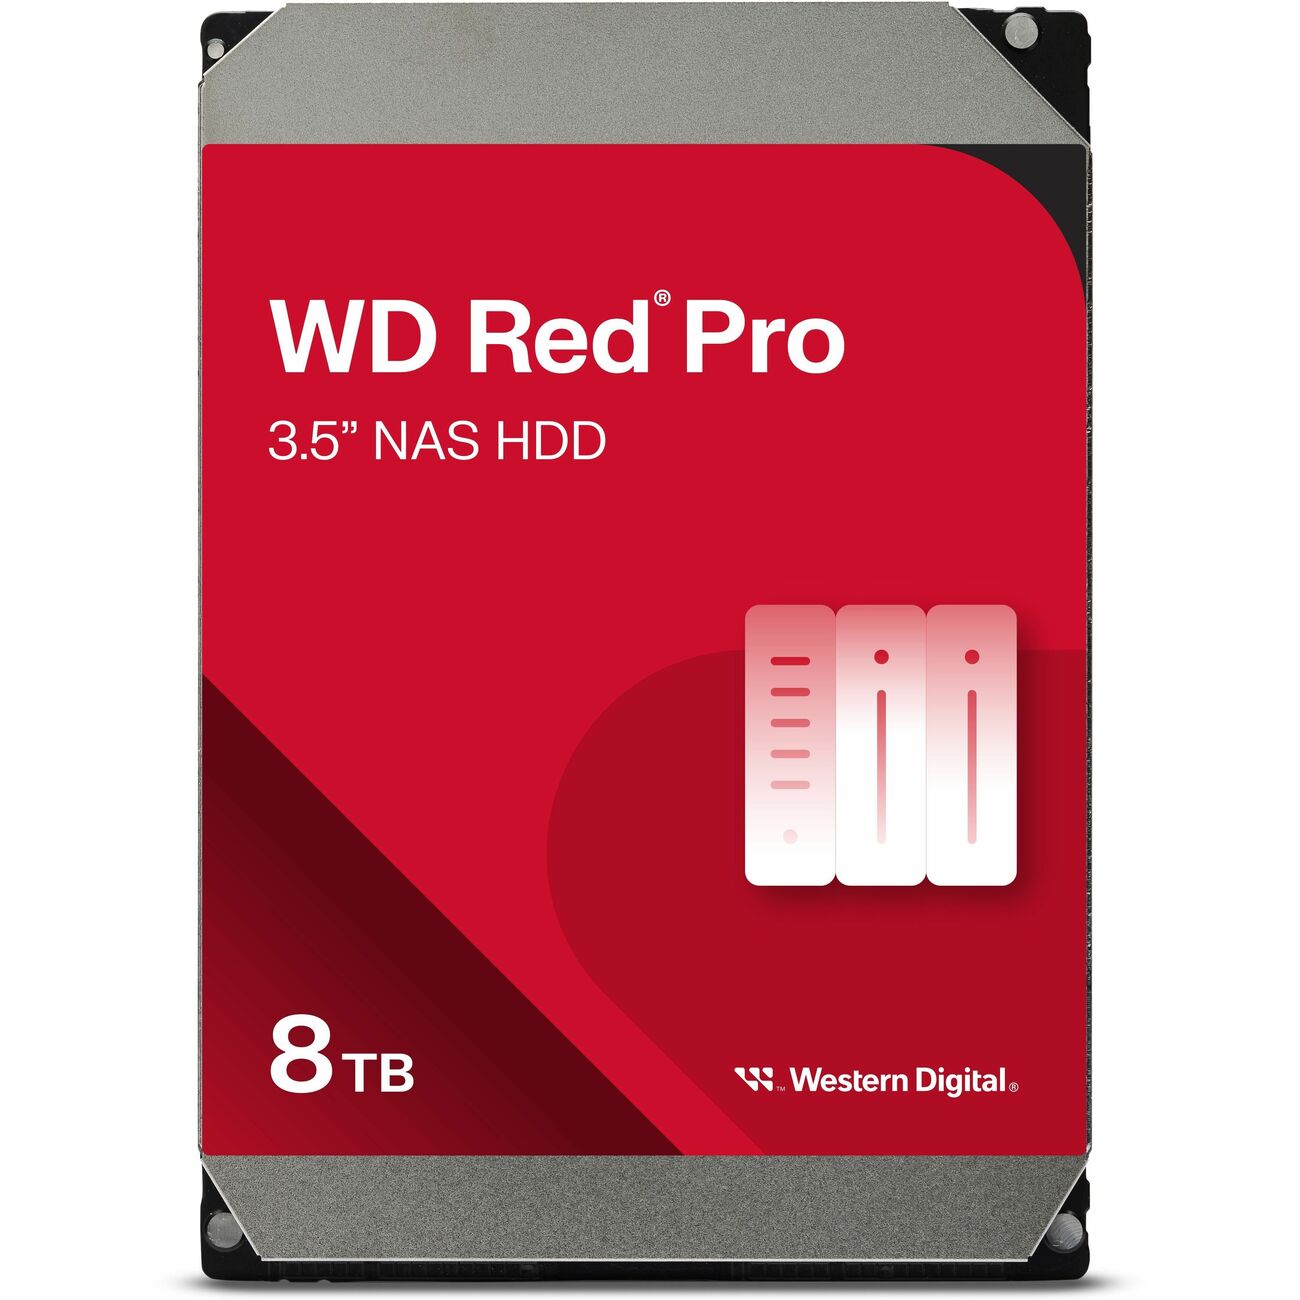 WD Red Pro 8TB 7200 RPM 3.5